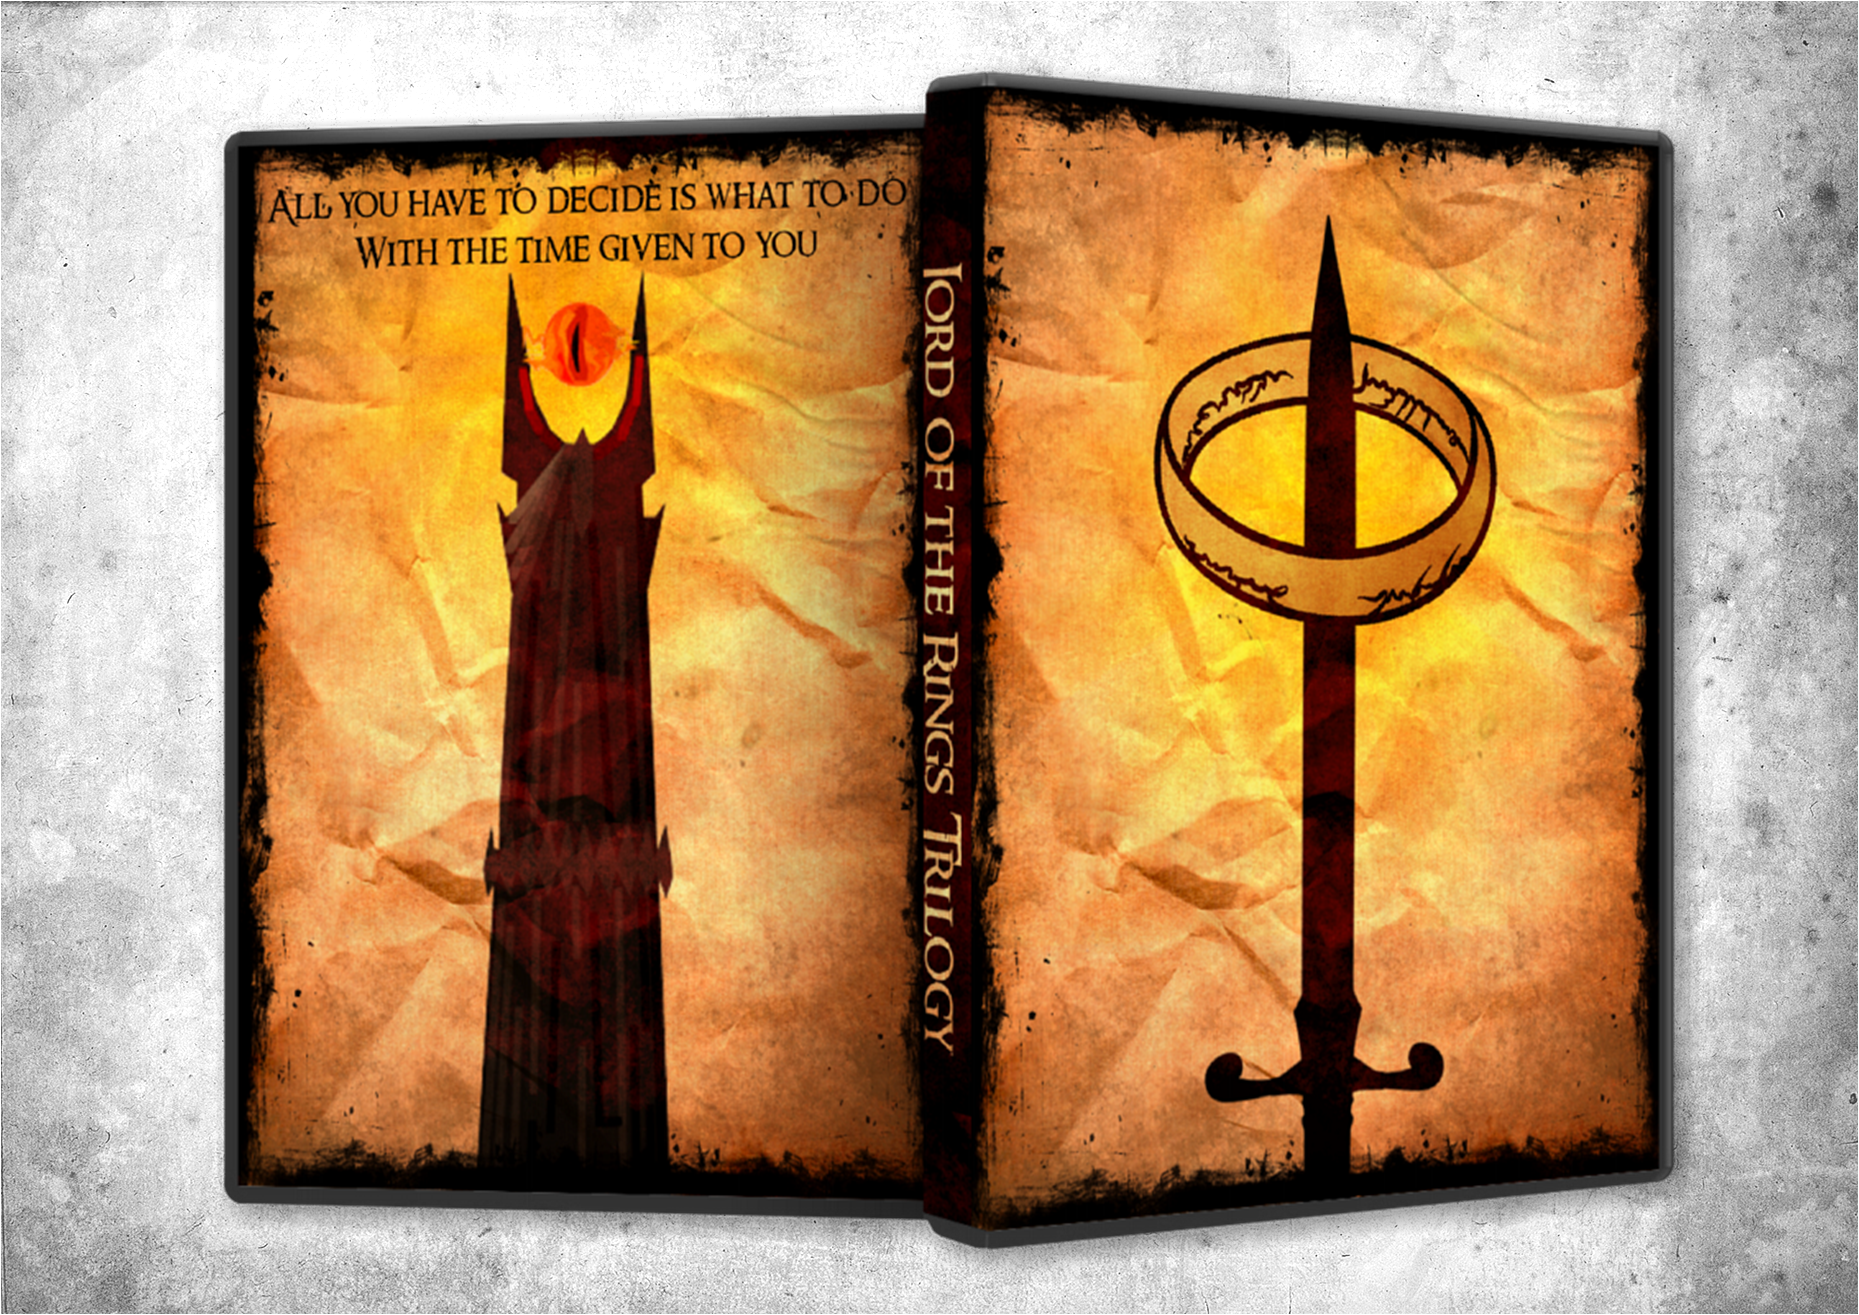 Lord of the Rings Trilogy box cover